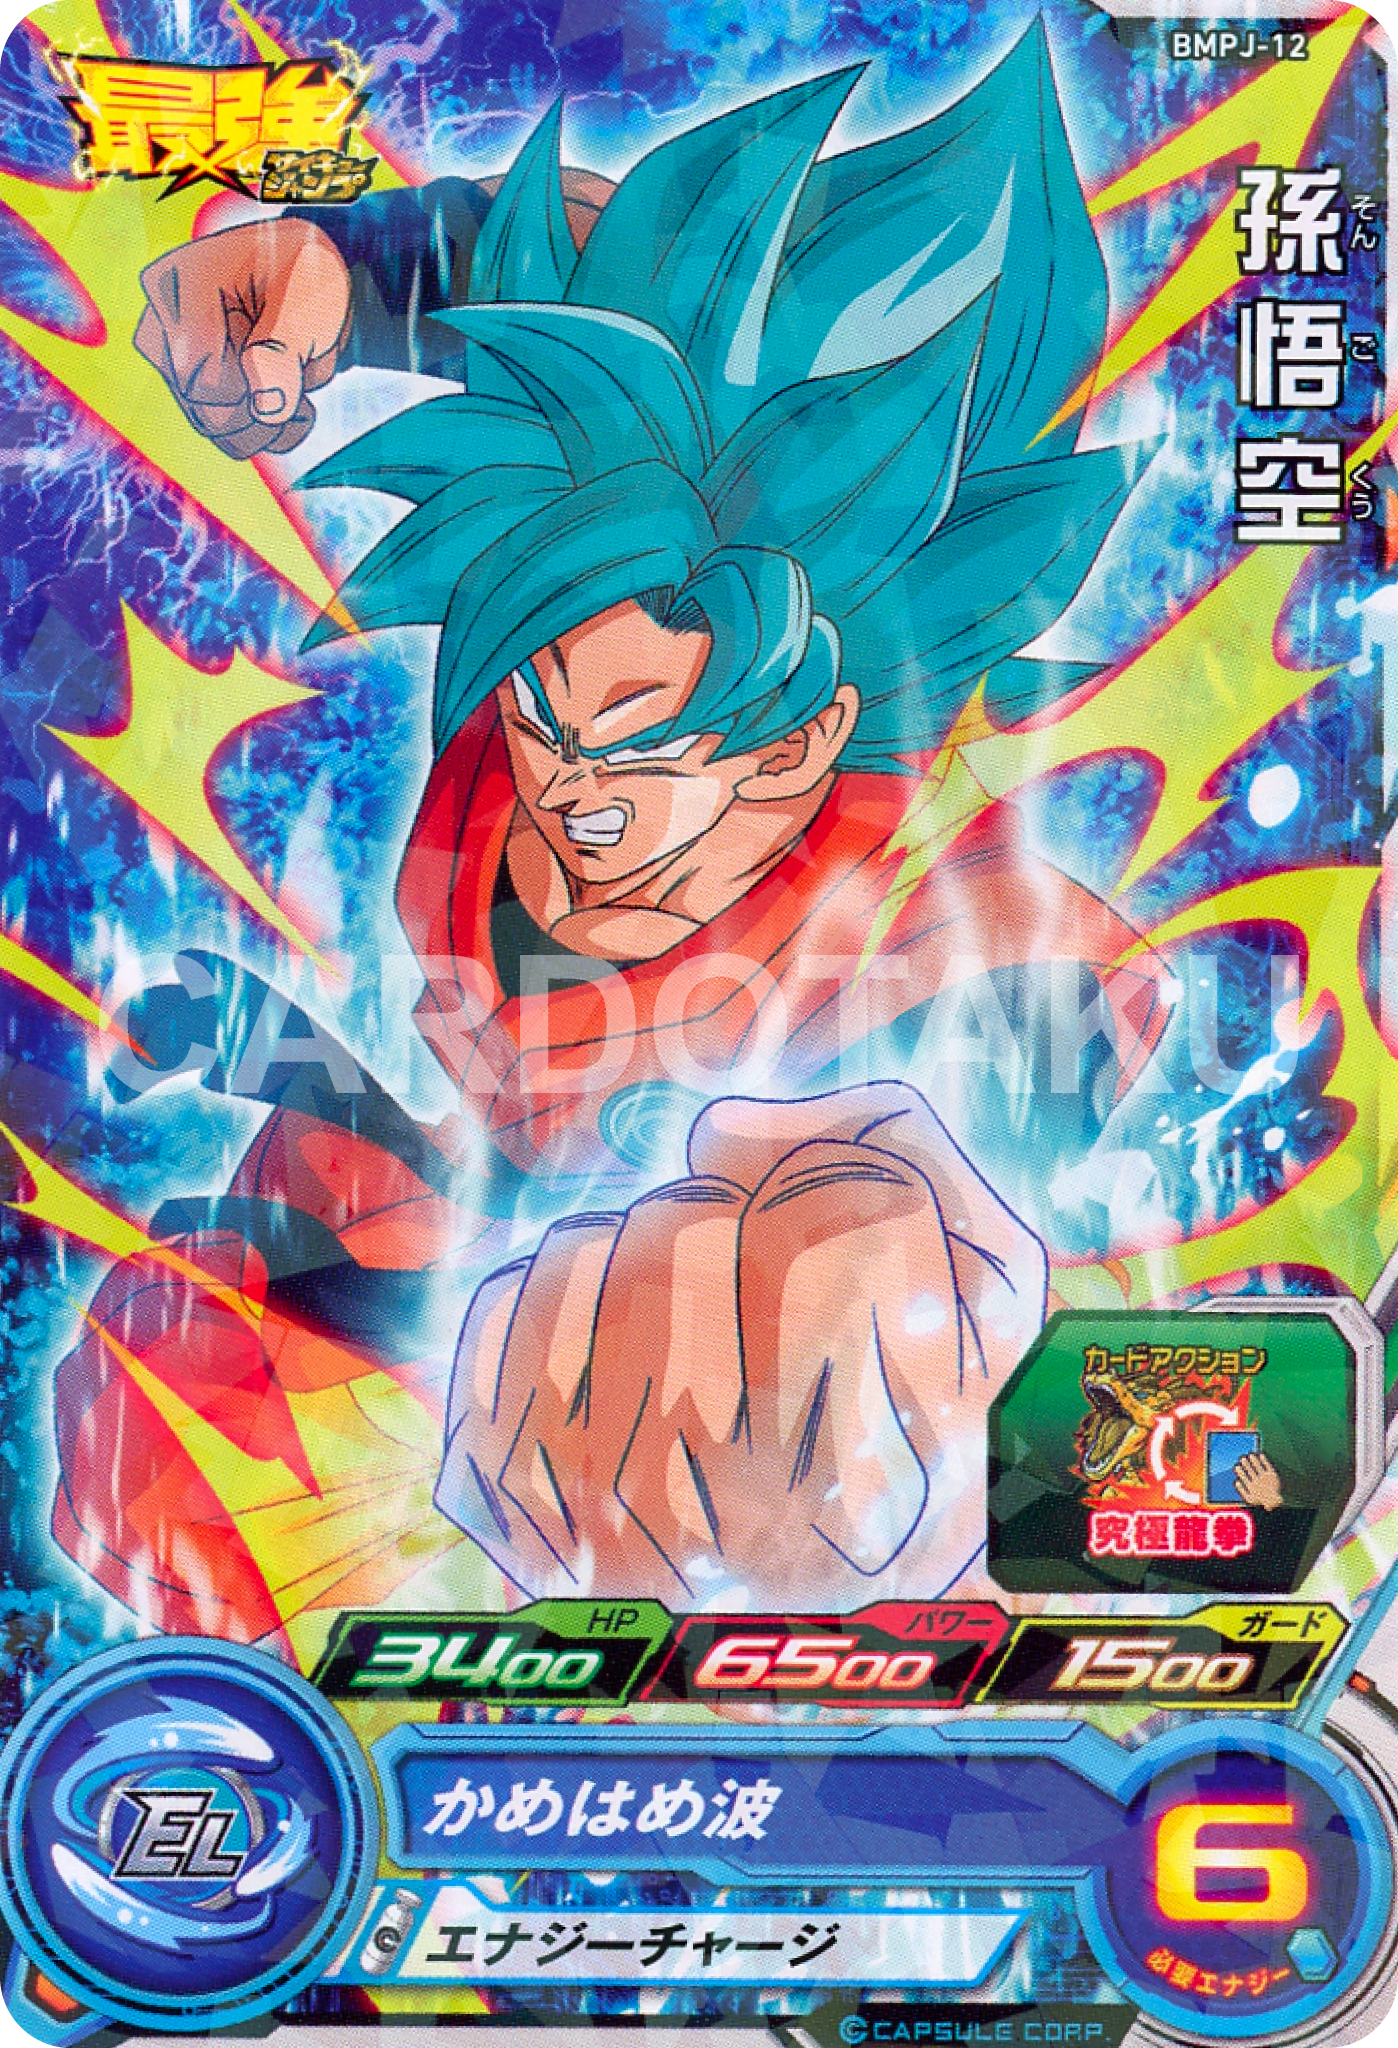 SUPER DRAGON BALL HEROES BMPJ-12  Promotional card sold with the September 2020 issue of Saikyo Jump magazine released August 4 2020.  Son Goku